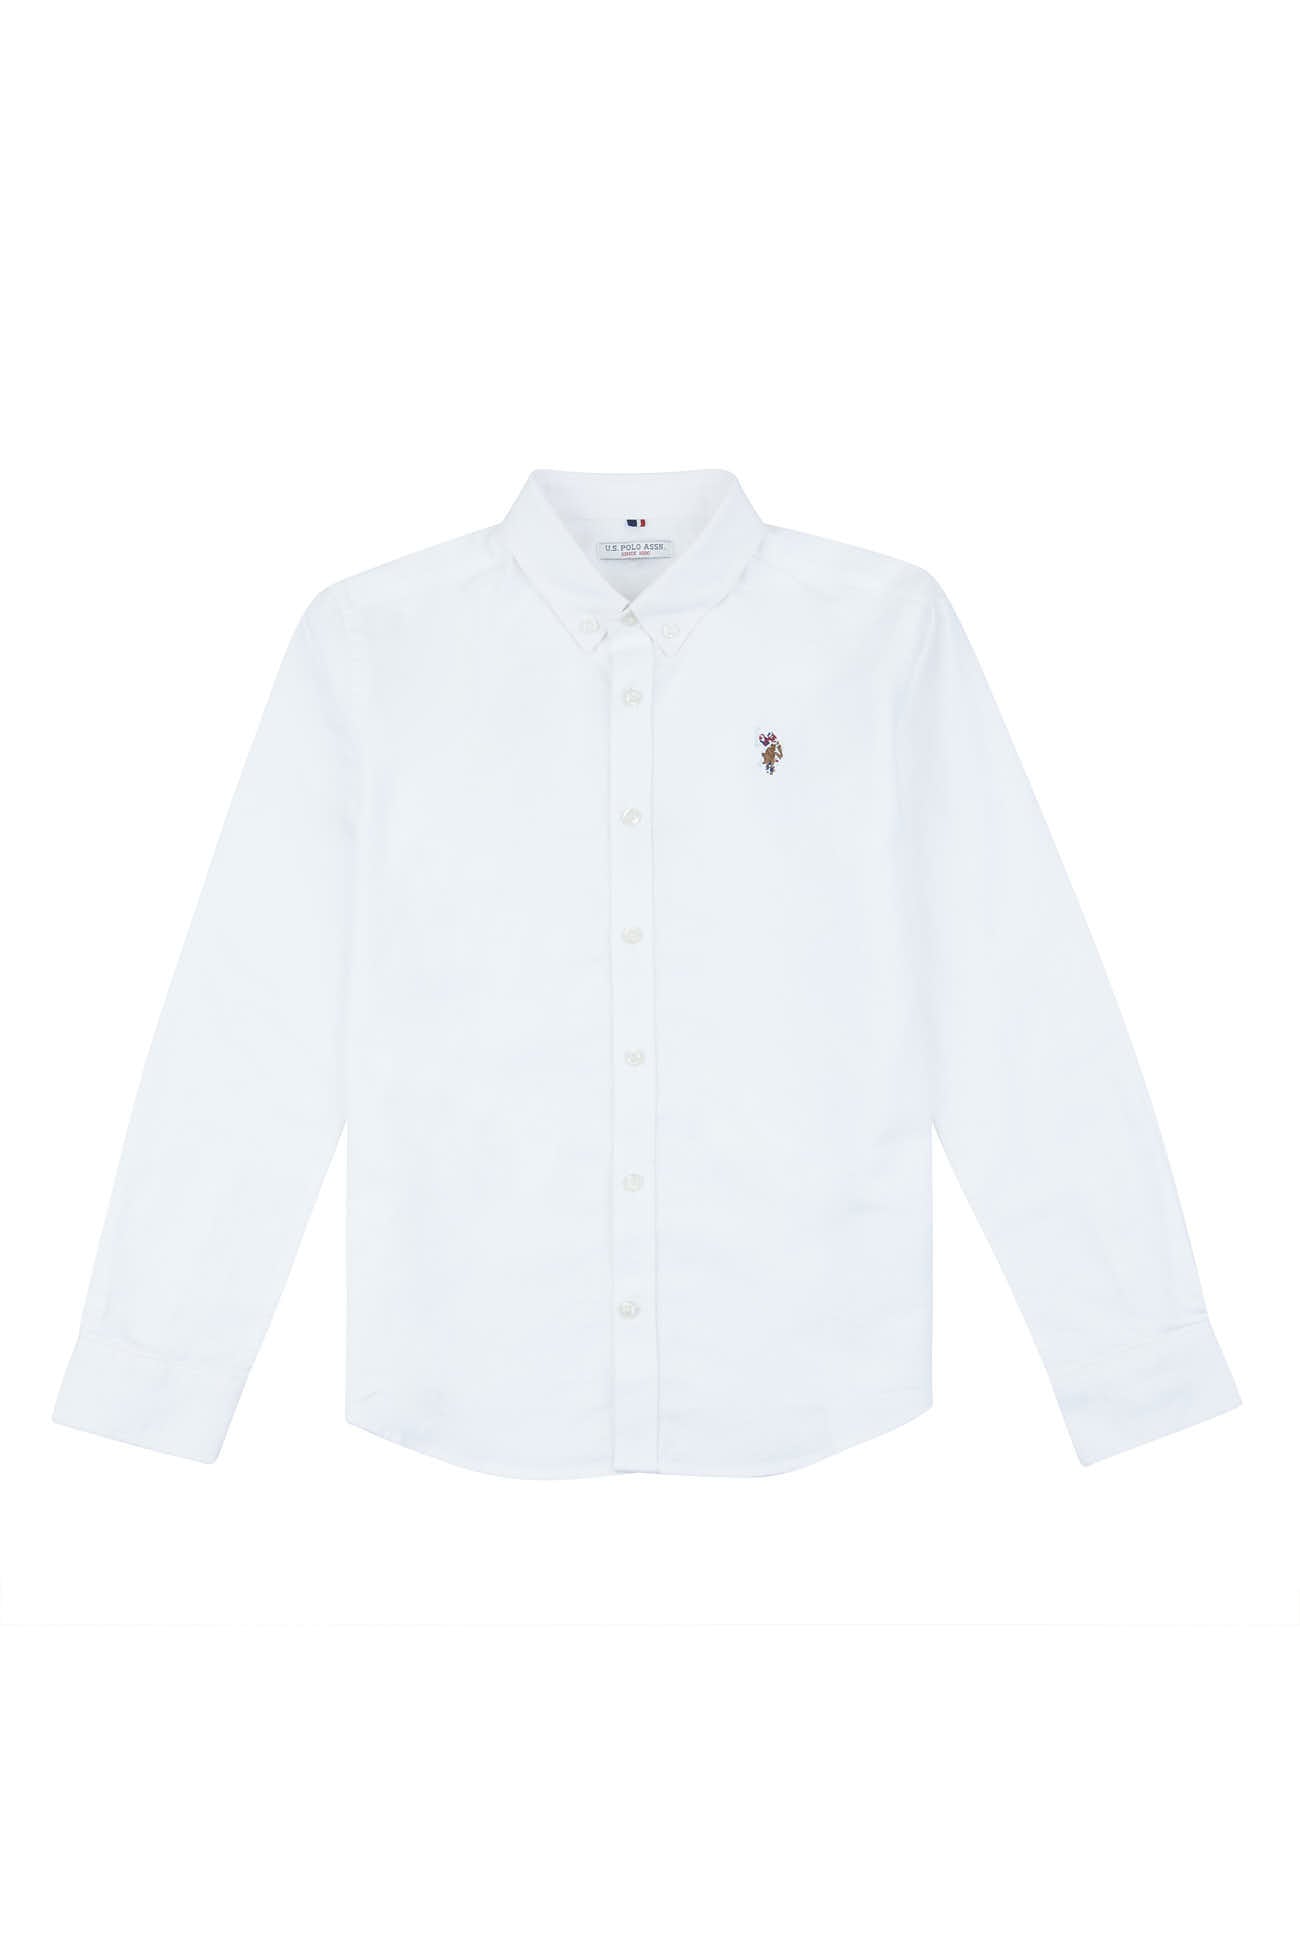 U.S. Polo Assn. Boys Lifestyle Peached Oxford Shirt in Bright White